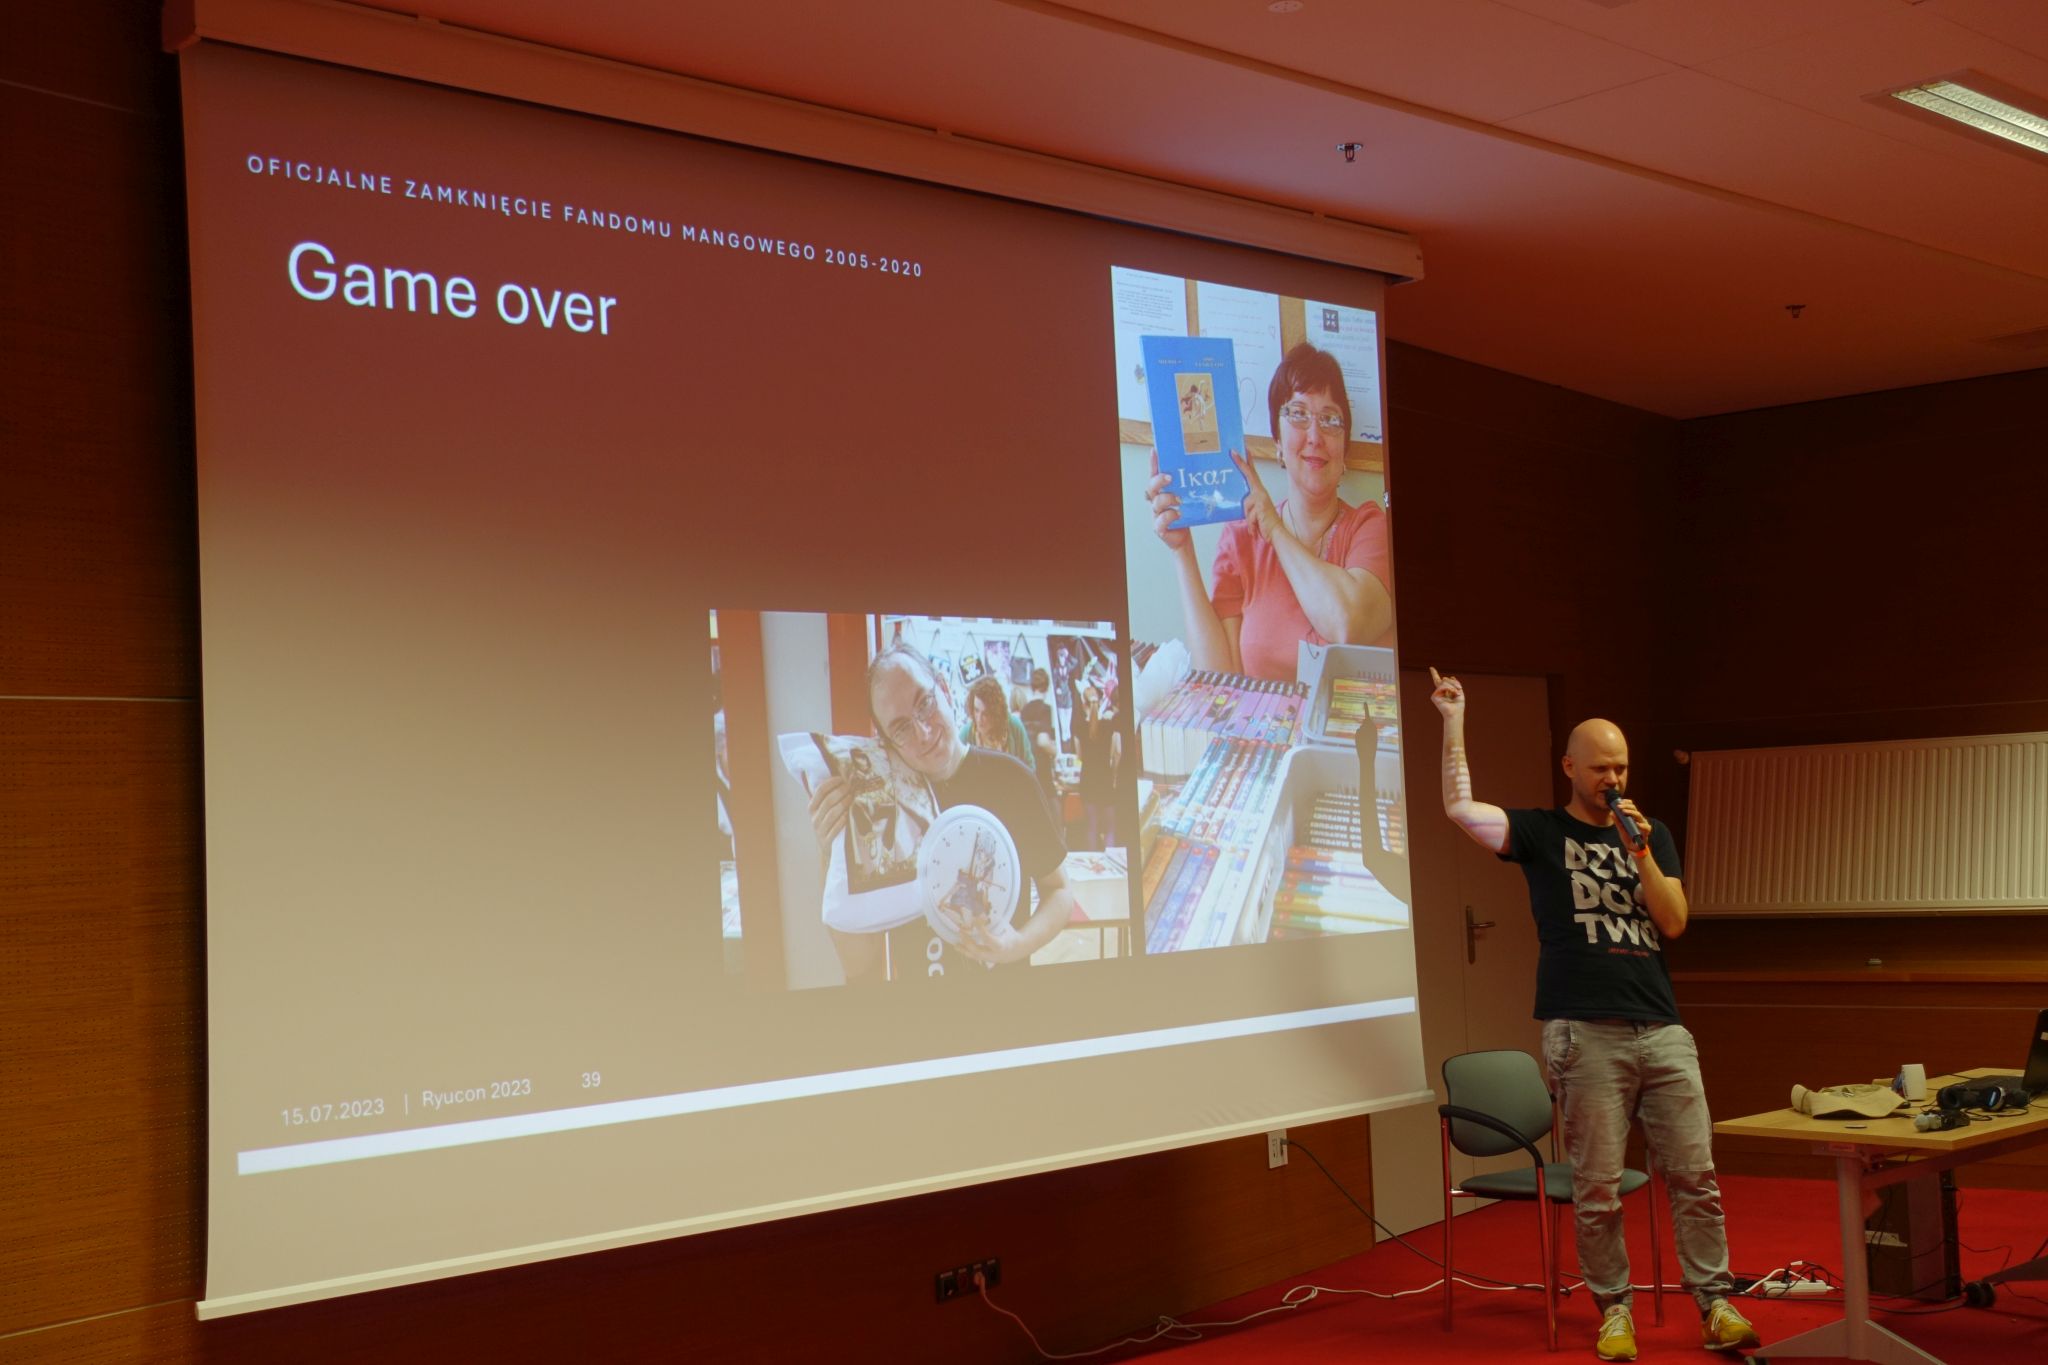 A man speaking to the microphone and pointing his finger to the screen behind him. The screen shows pictures of two people and the text 'Game over'.